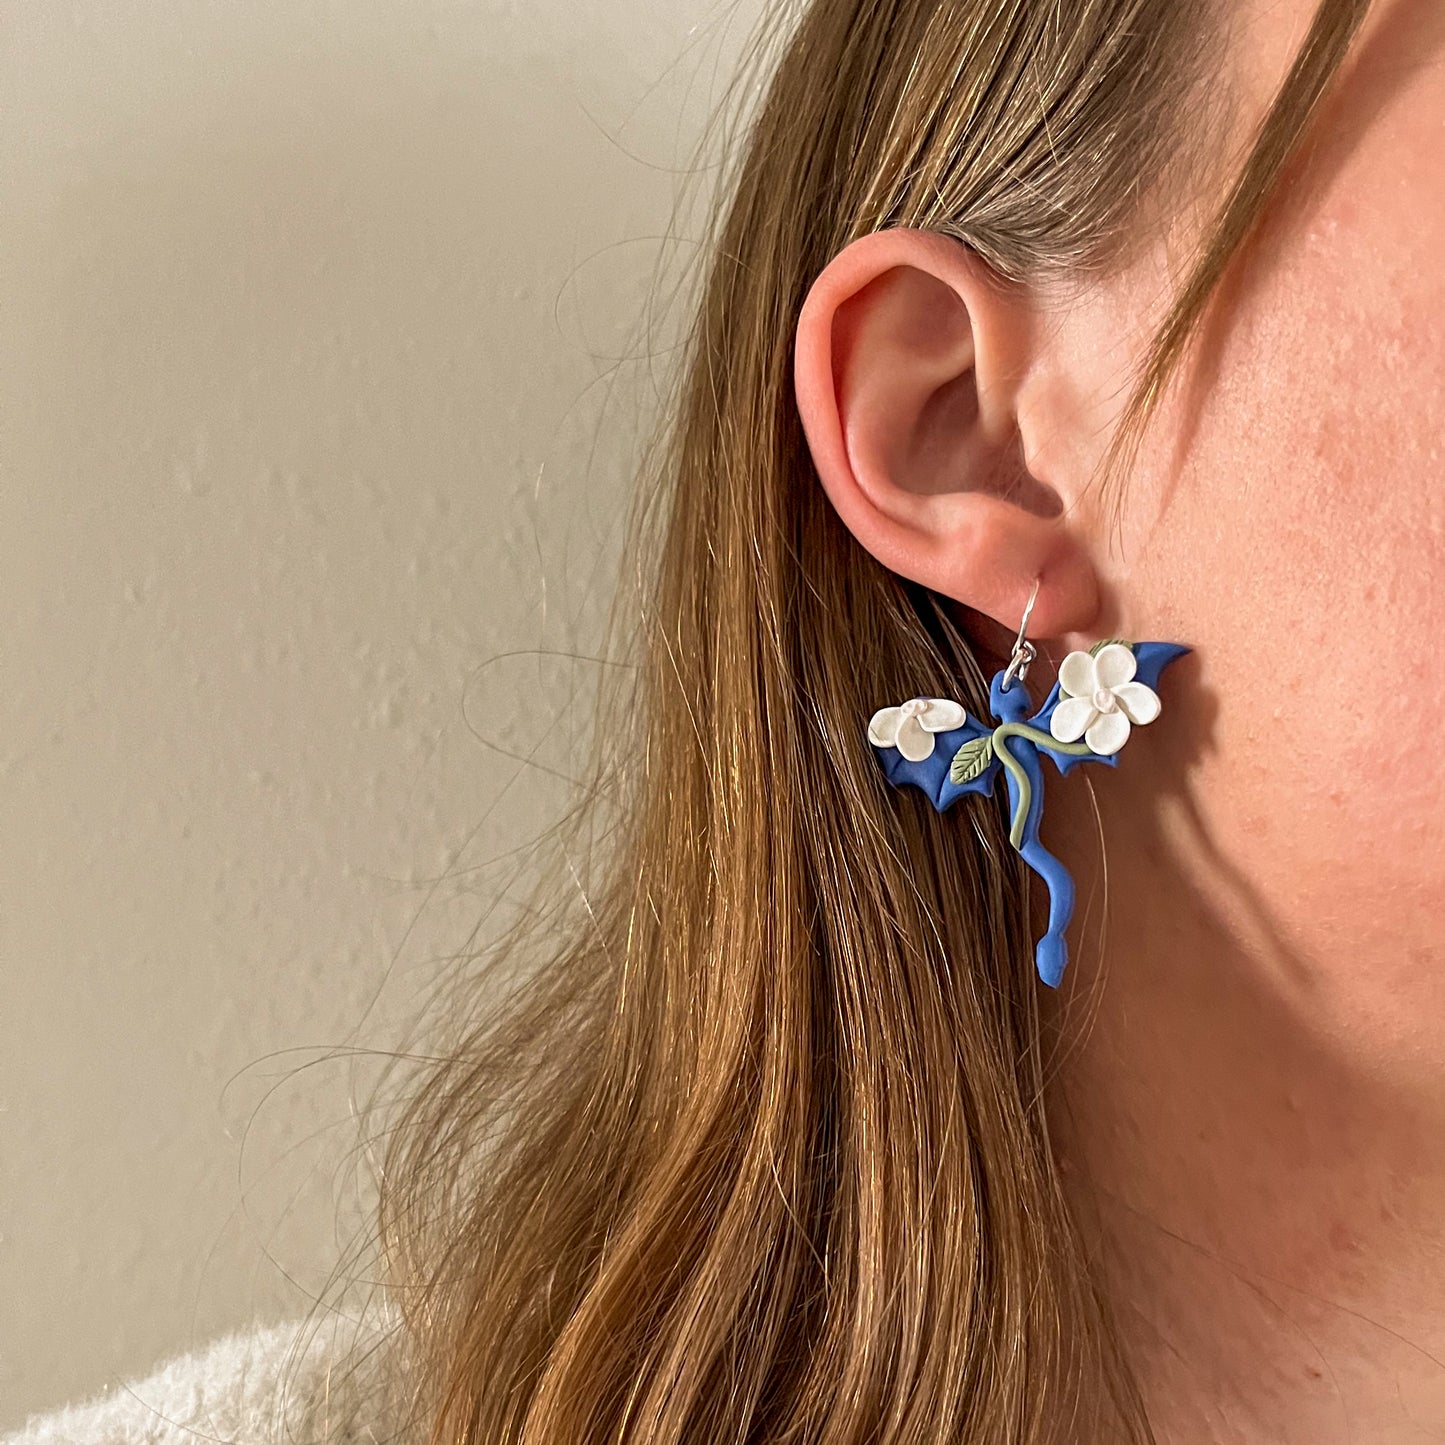 Blue dragon earring with white floral details | sterling silver